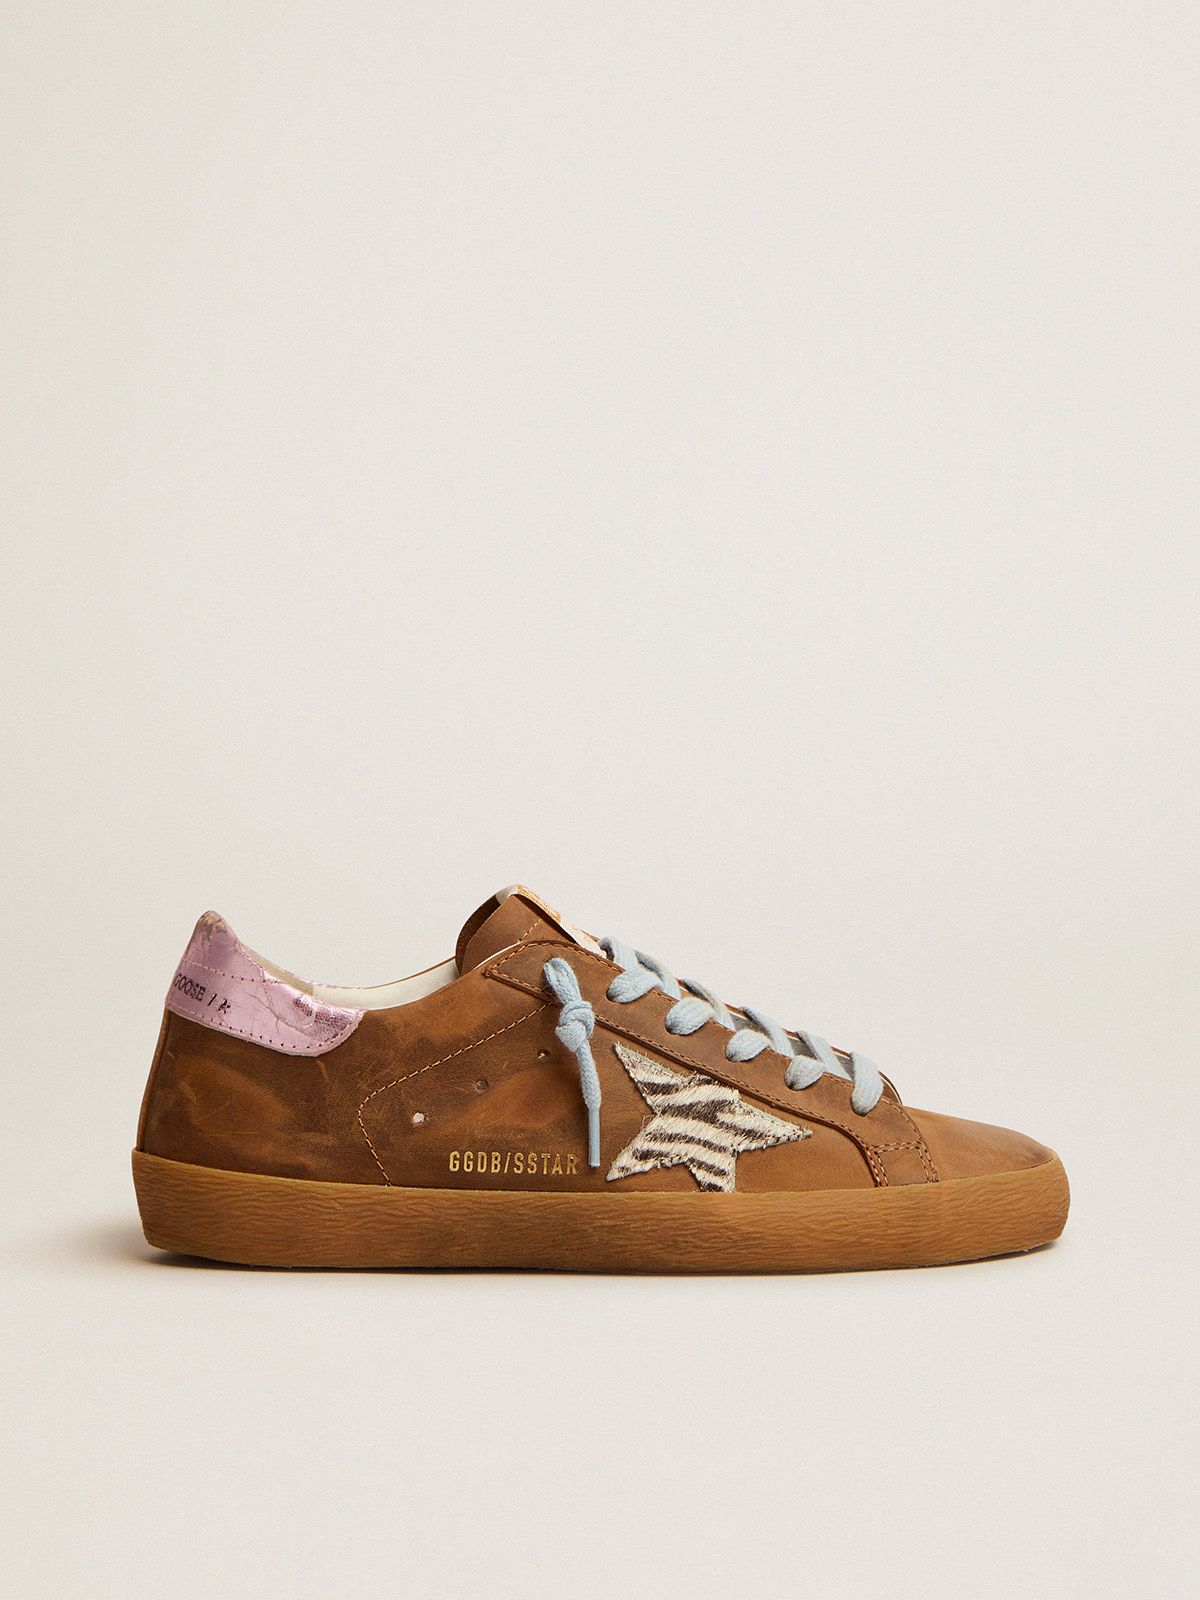 Sneakers Uomo Golden Goose Super-Star sneakers in brown waxed suede with a zebra-print pony skin star